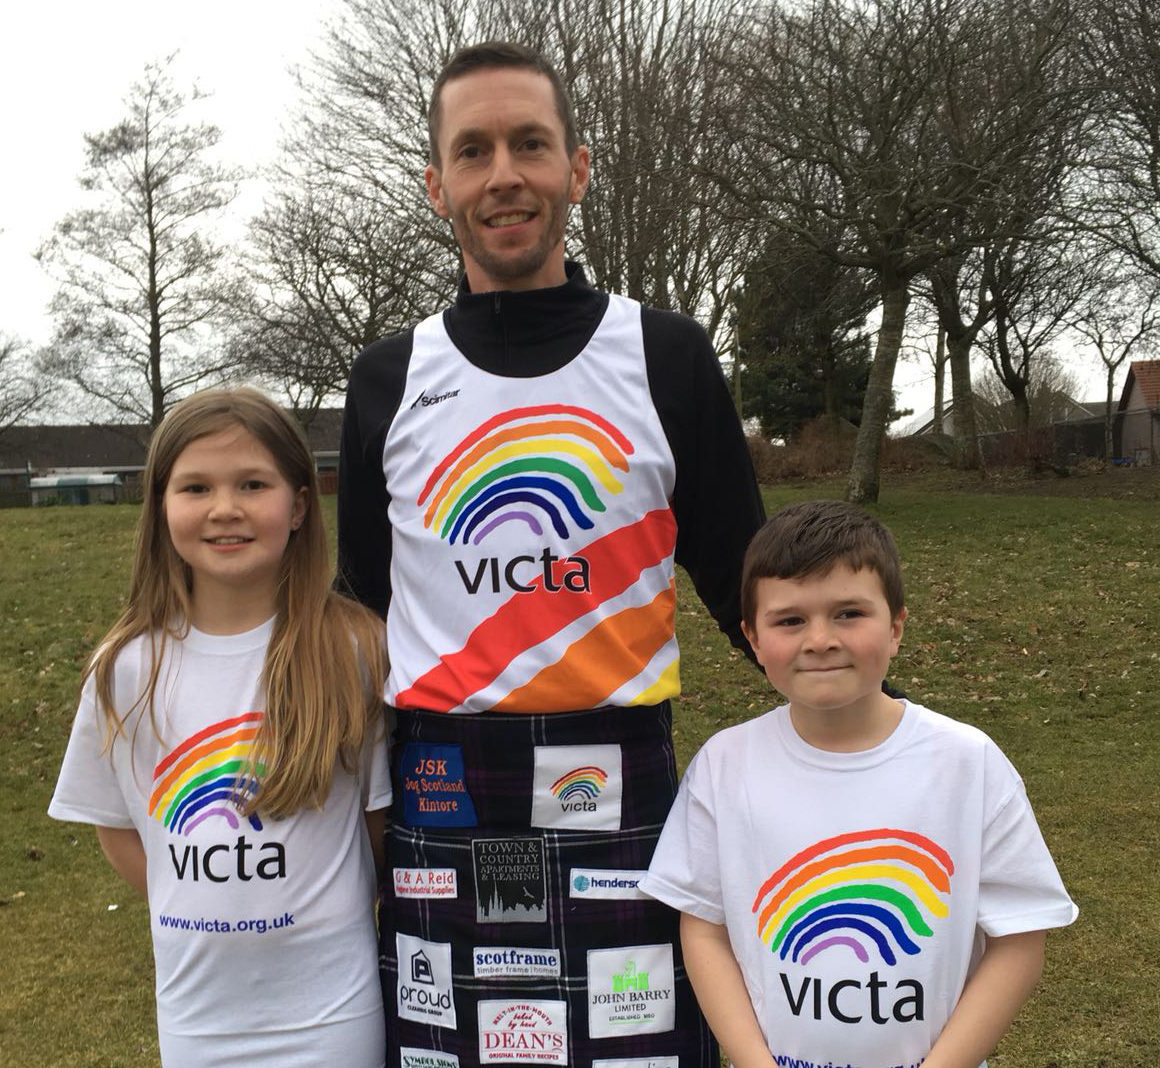 Martin Reid - who is running the London Marathon

Martin Reid
Age - 39
Live in Inverurie
Married to my wife Kelly 39 who is making the trip down to London to support me.
2 Children - Ellie 10 and Darach aged 7